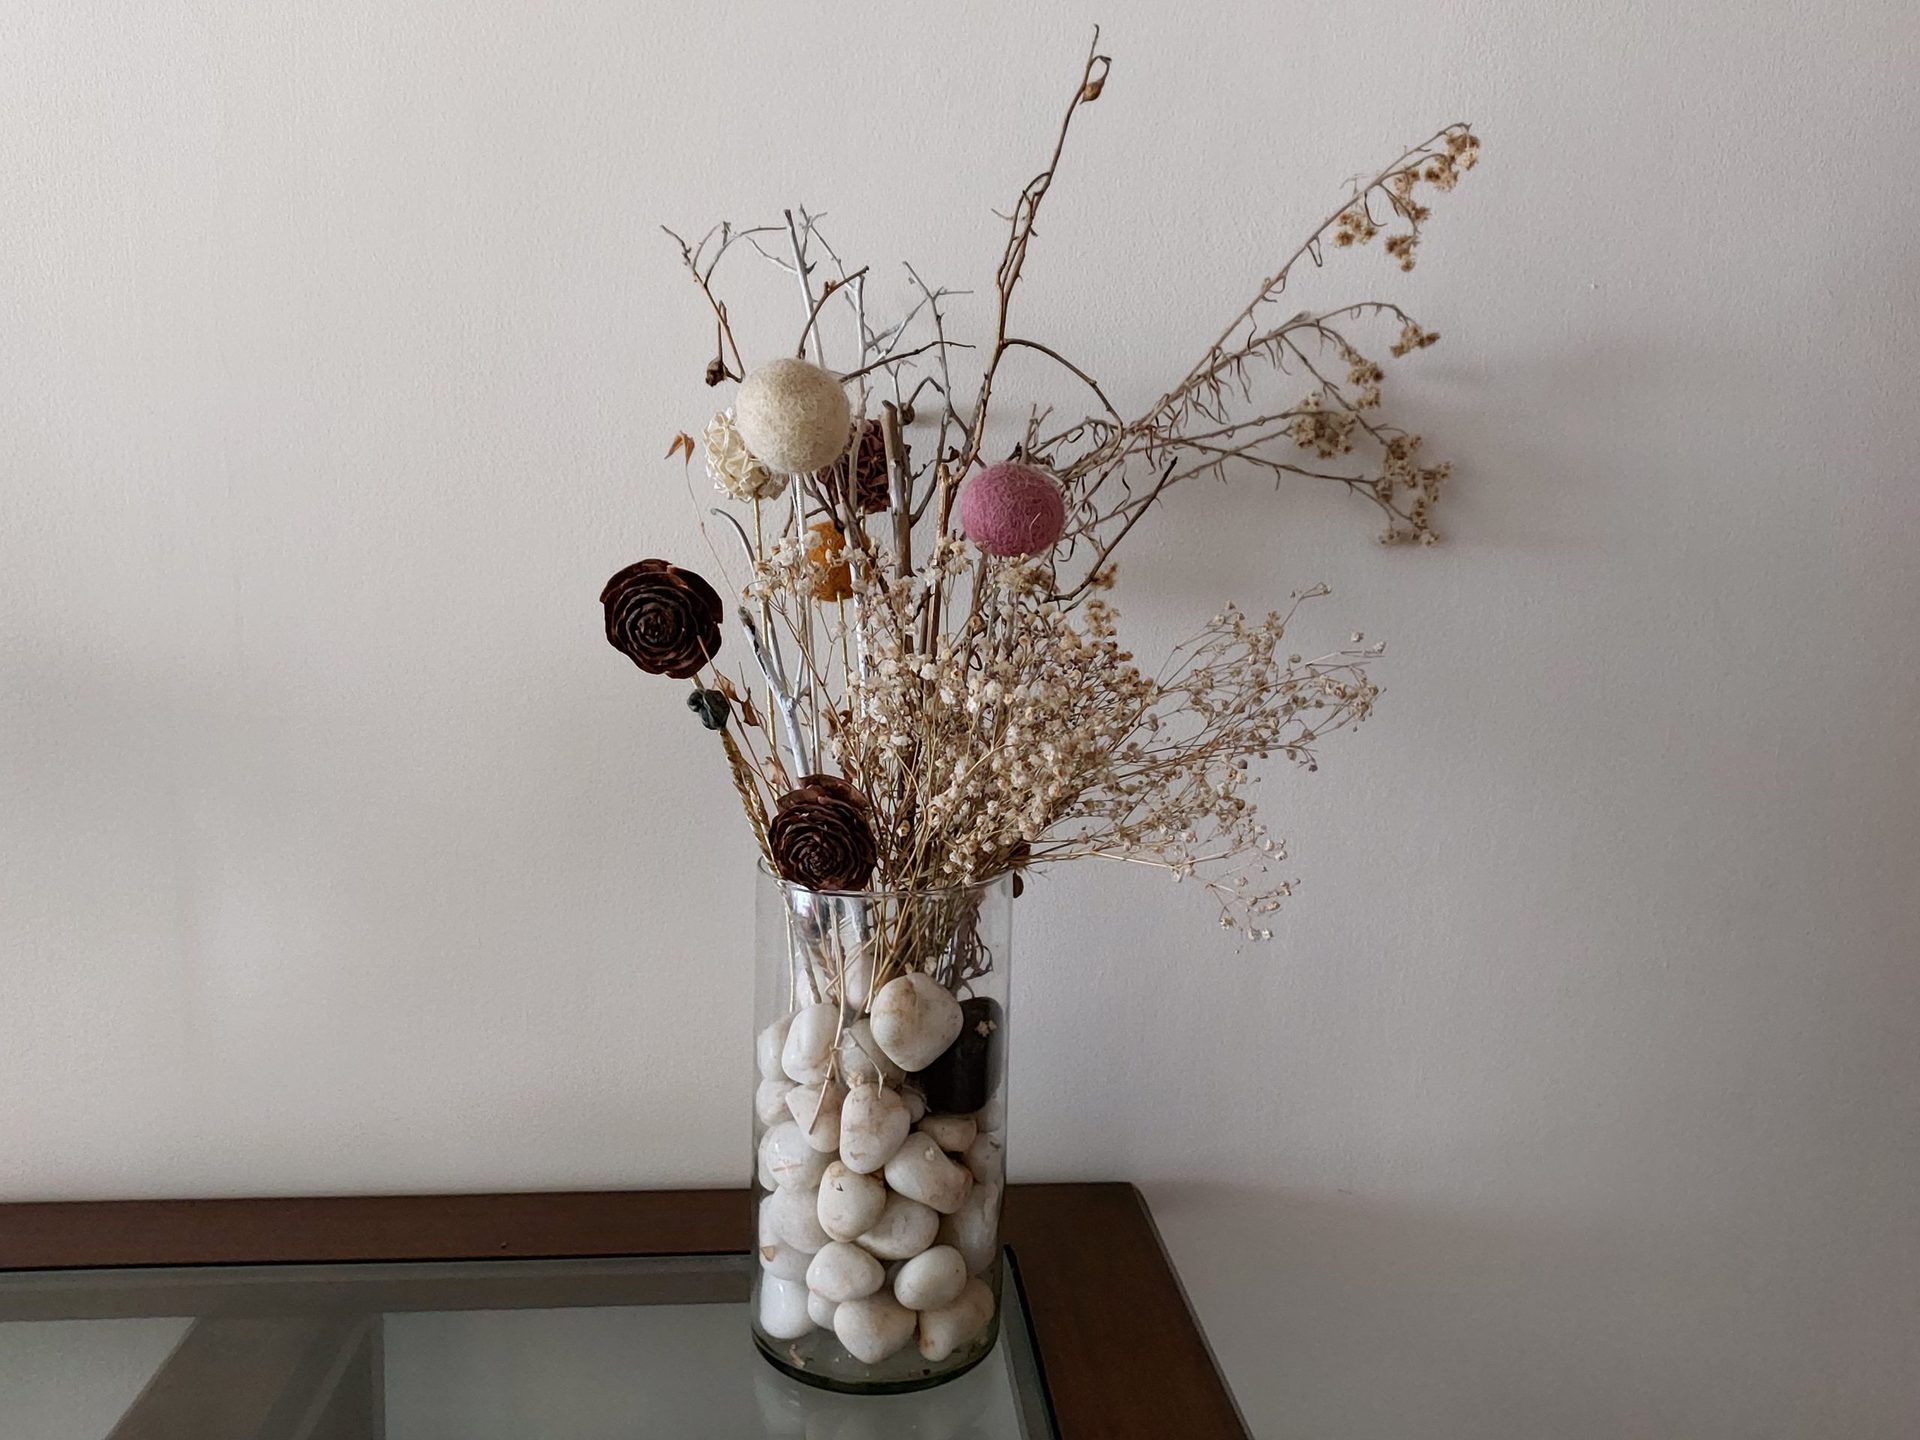 Samsung Galaxy M52 camera sample indoor night mode shot of flowers and pebbles in a glass vase